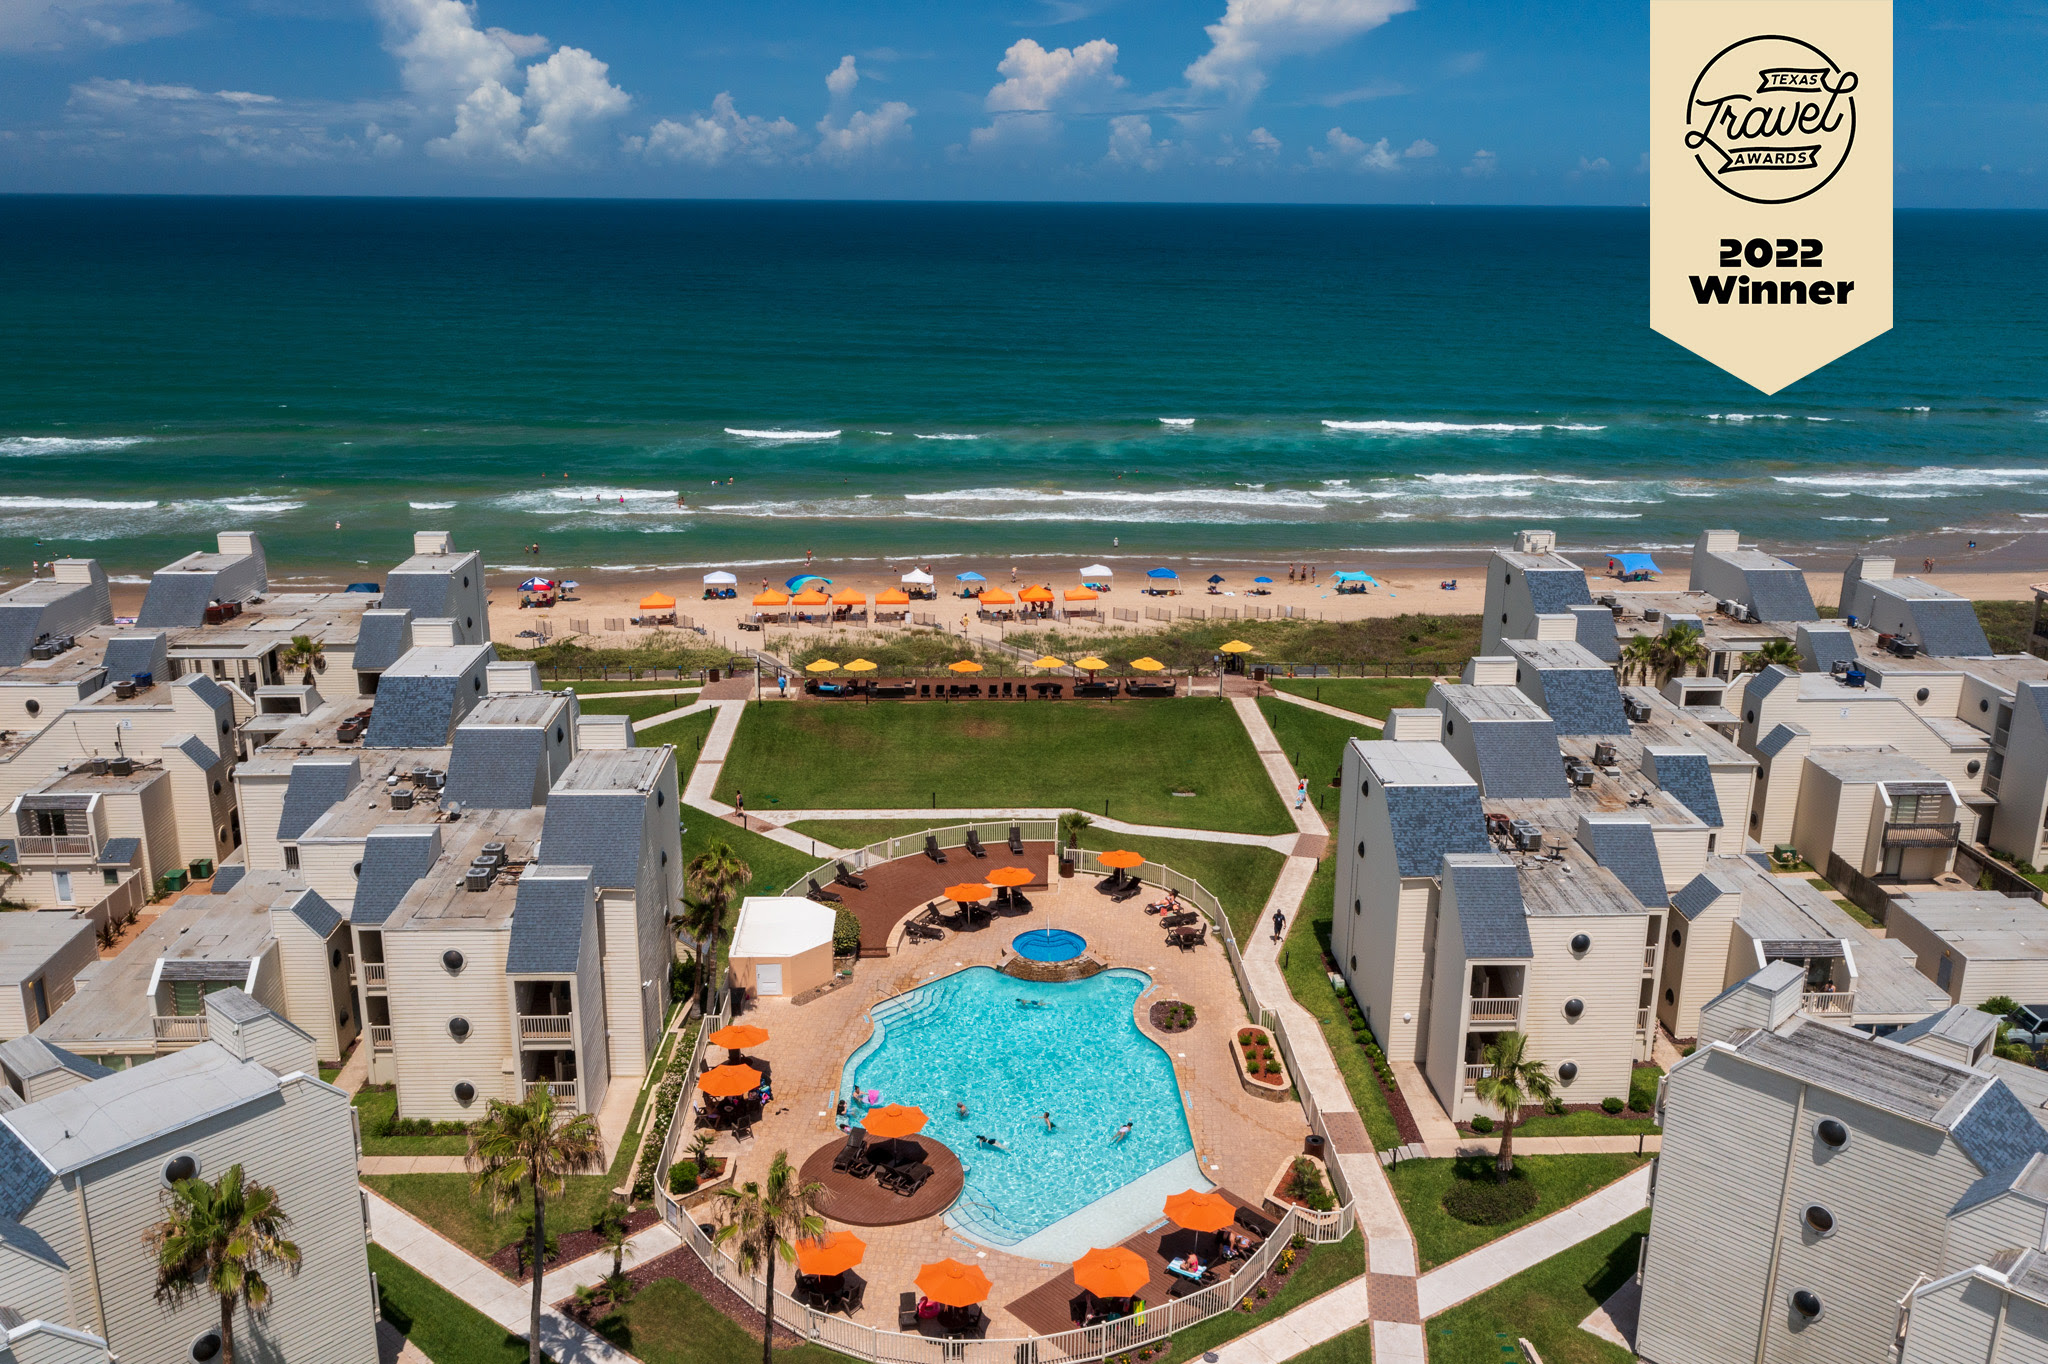 South Padre Island Named Destination of the Year by the Texas Travel Awards for Second Year in a Row